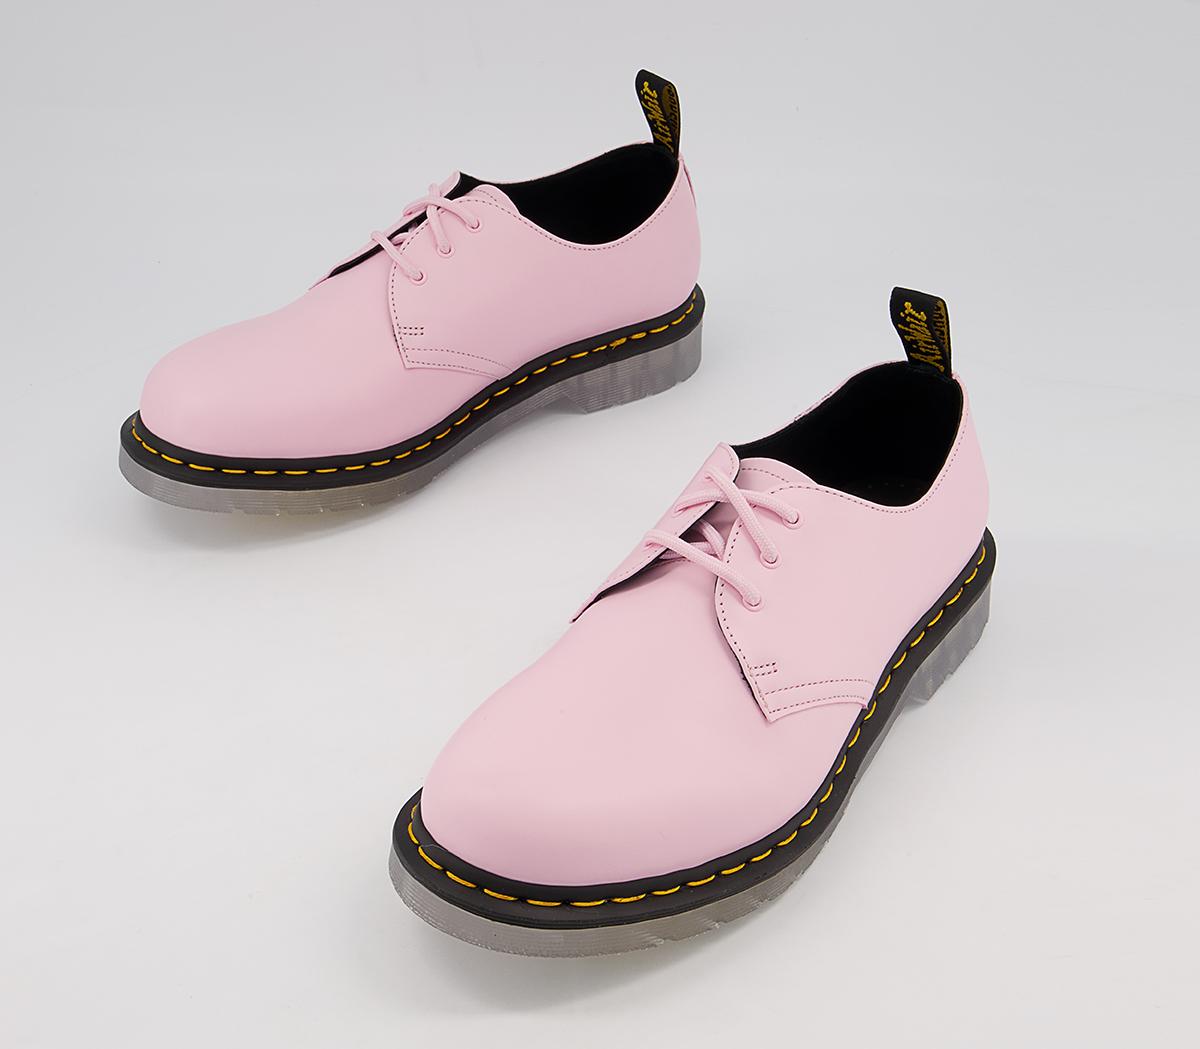 Dr. Martens 1461 Ice 3 Eye Shoes M Pale Pink - Men's Casual Shoes